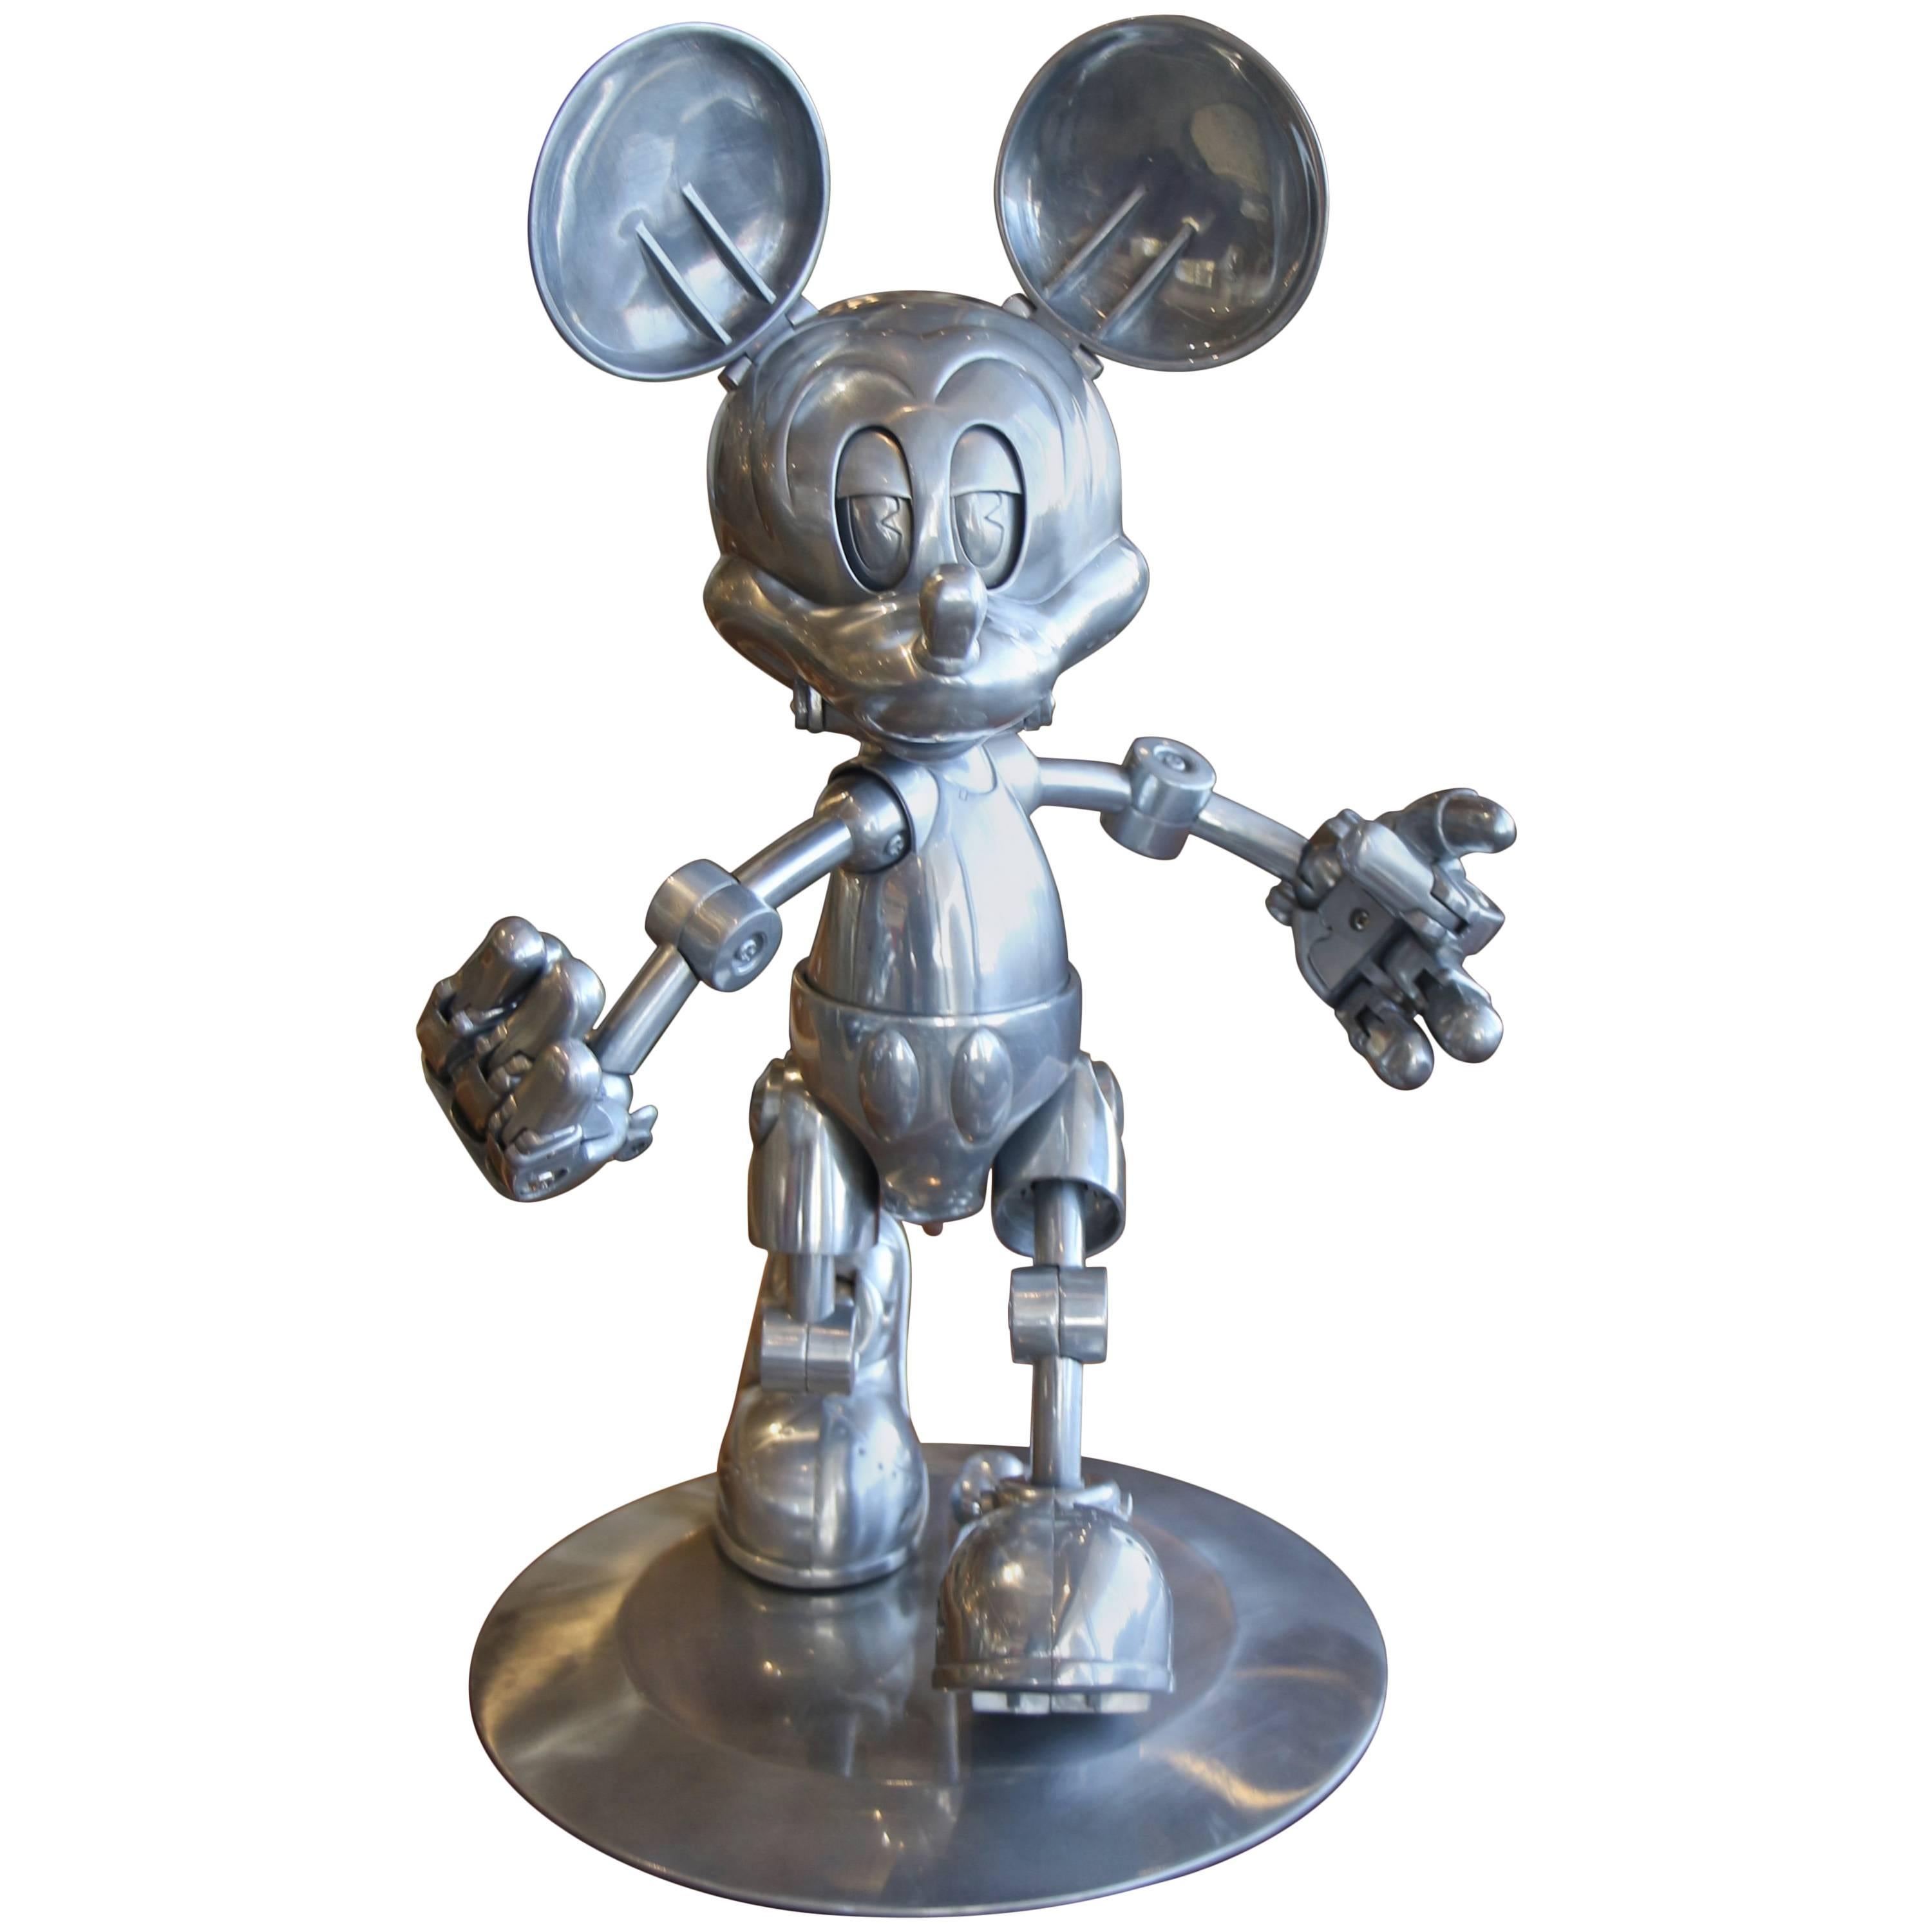 Hajime Sorayama for Disney Tomy Limited Edition Articulated Future Mickey Mouse